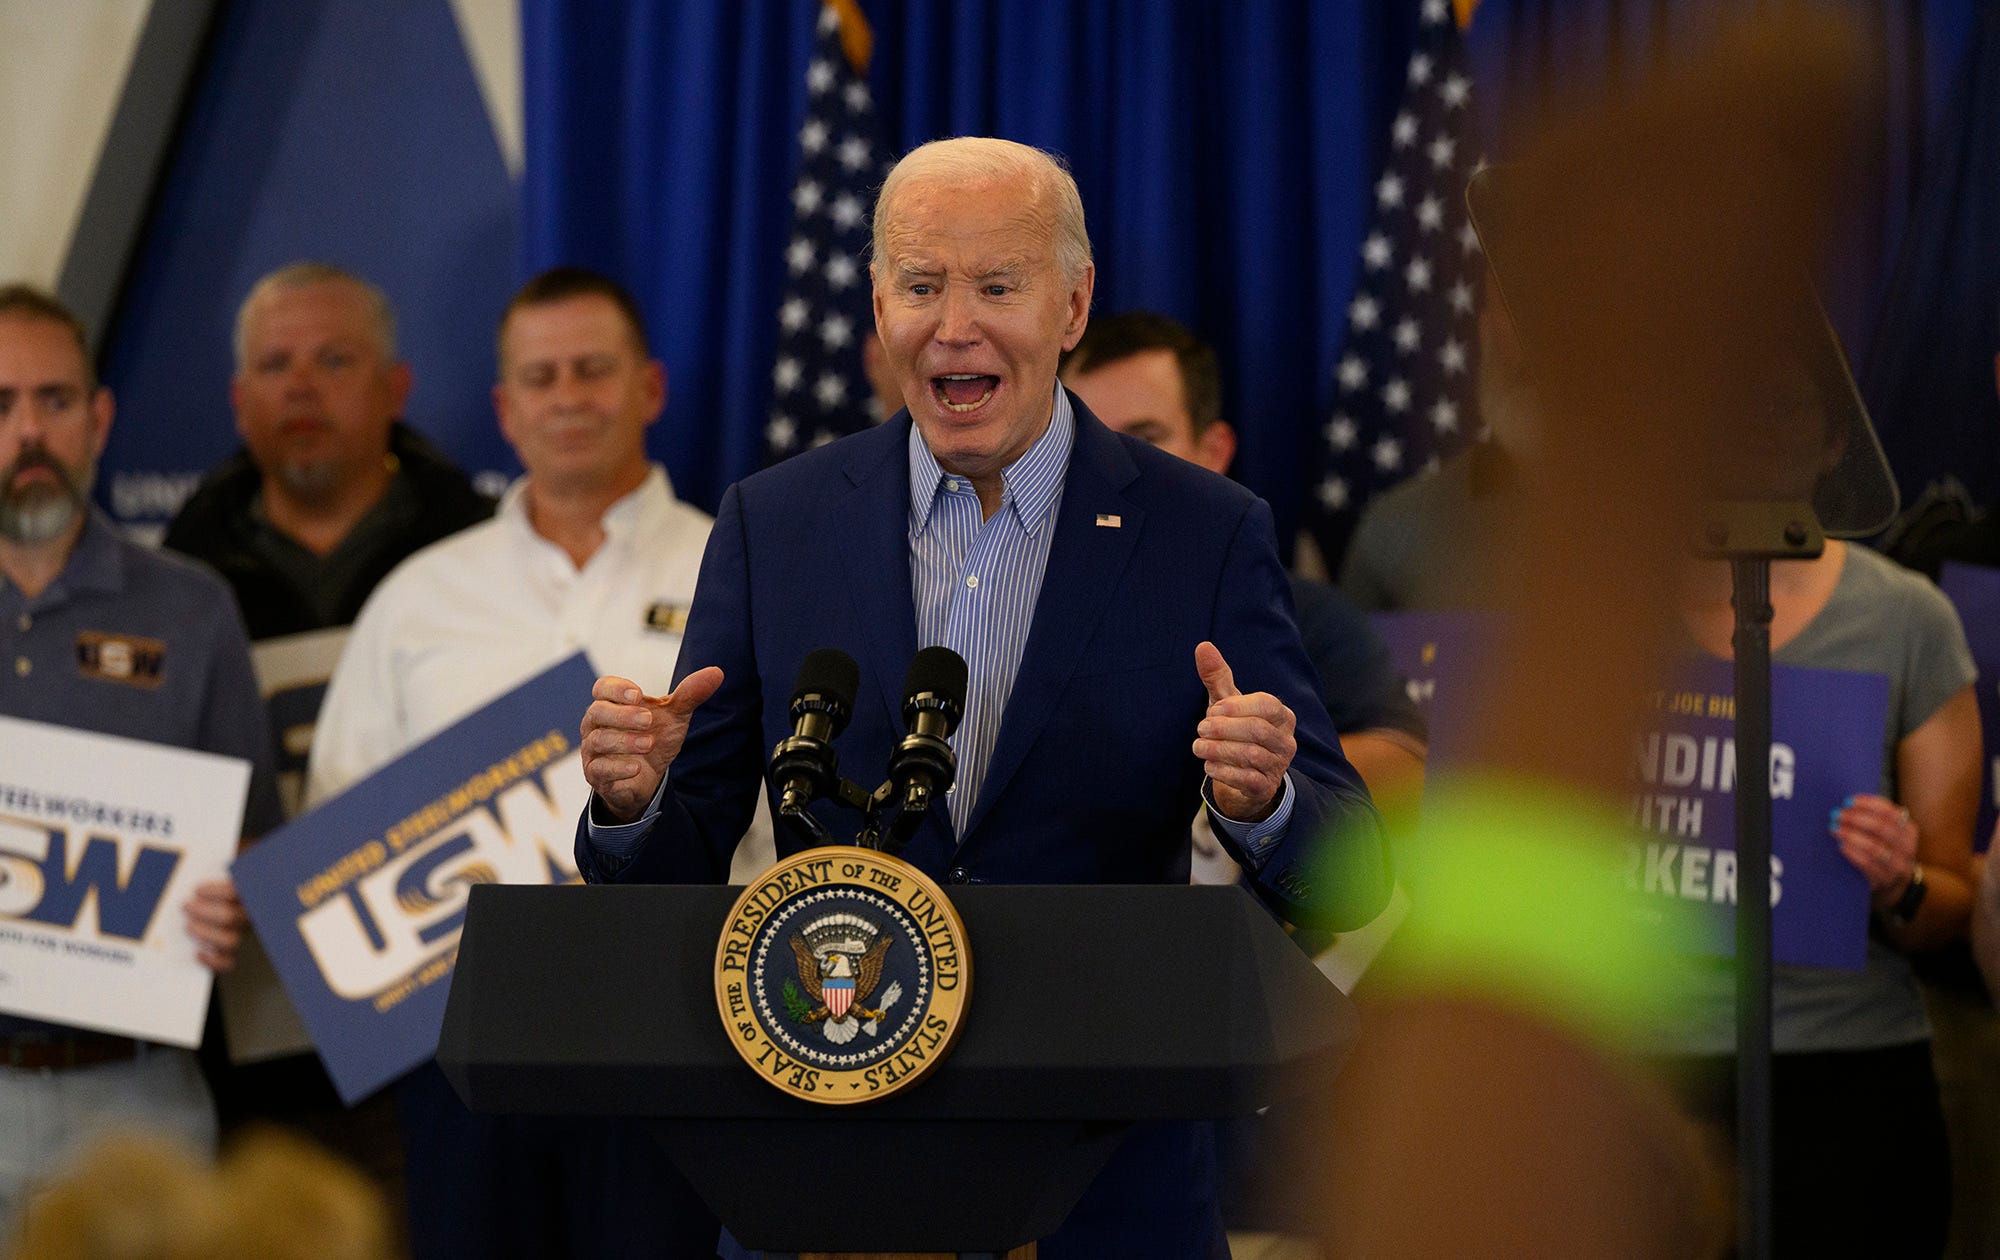 biden takes his first jab at trump over hush-money trial